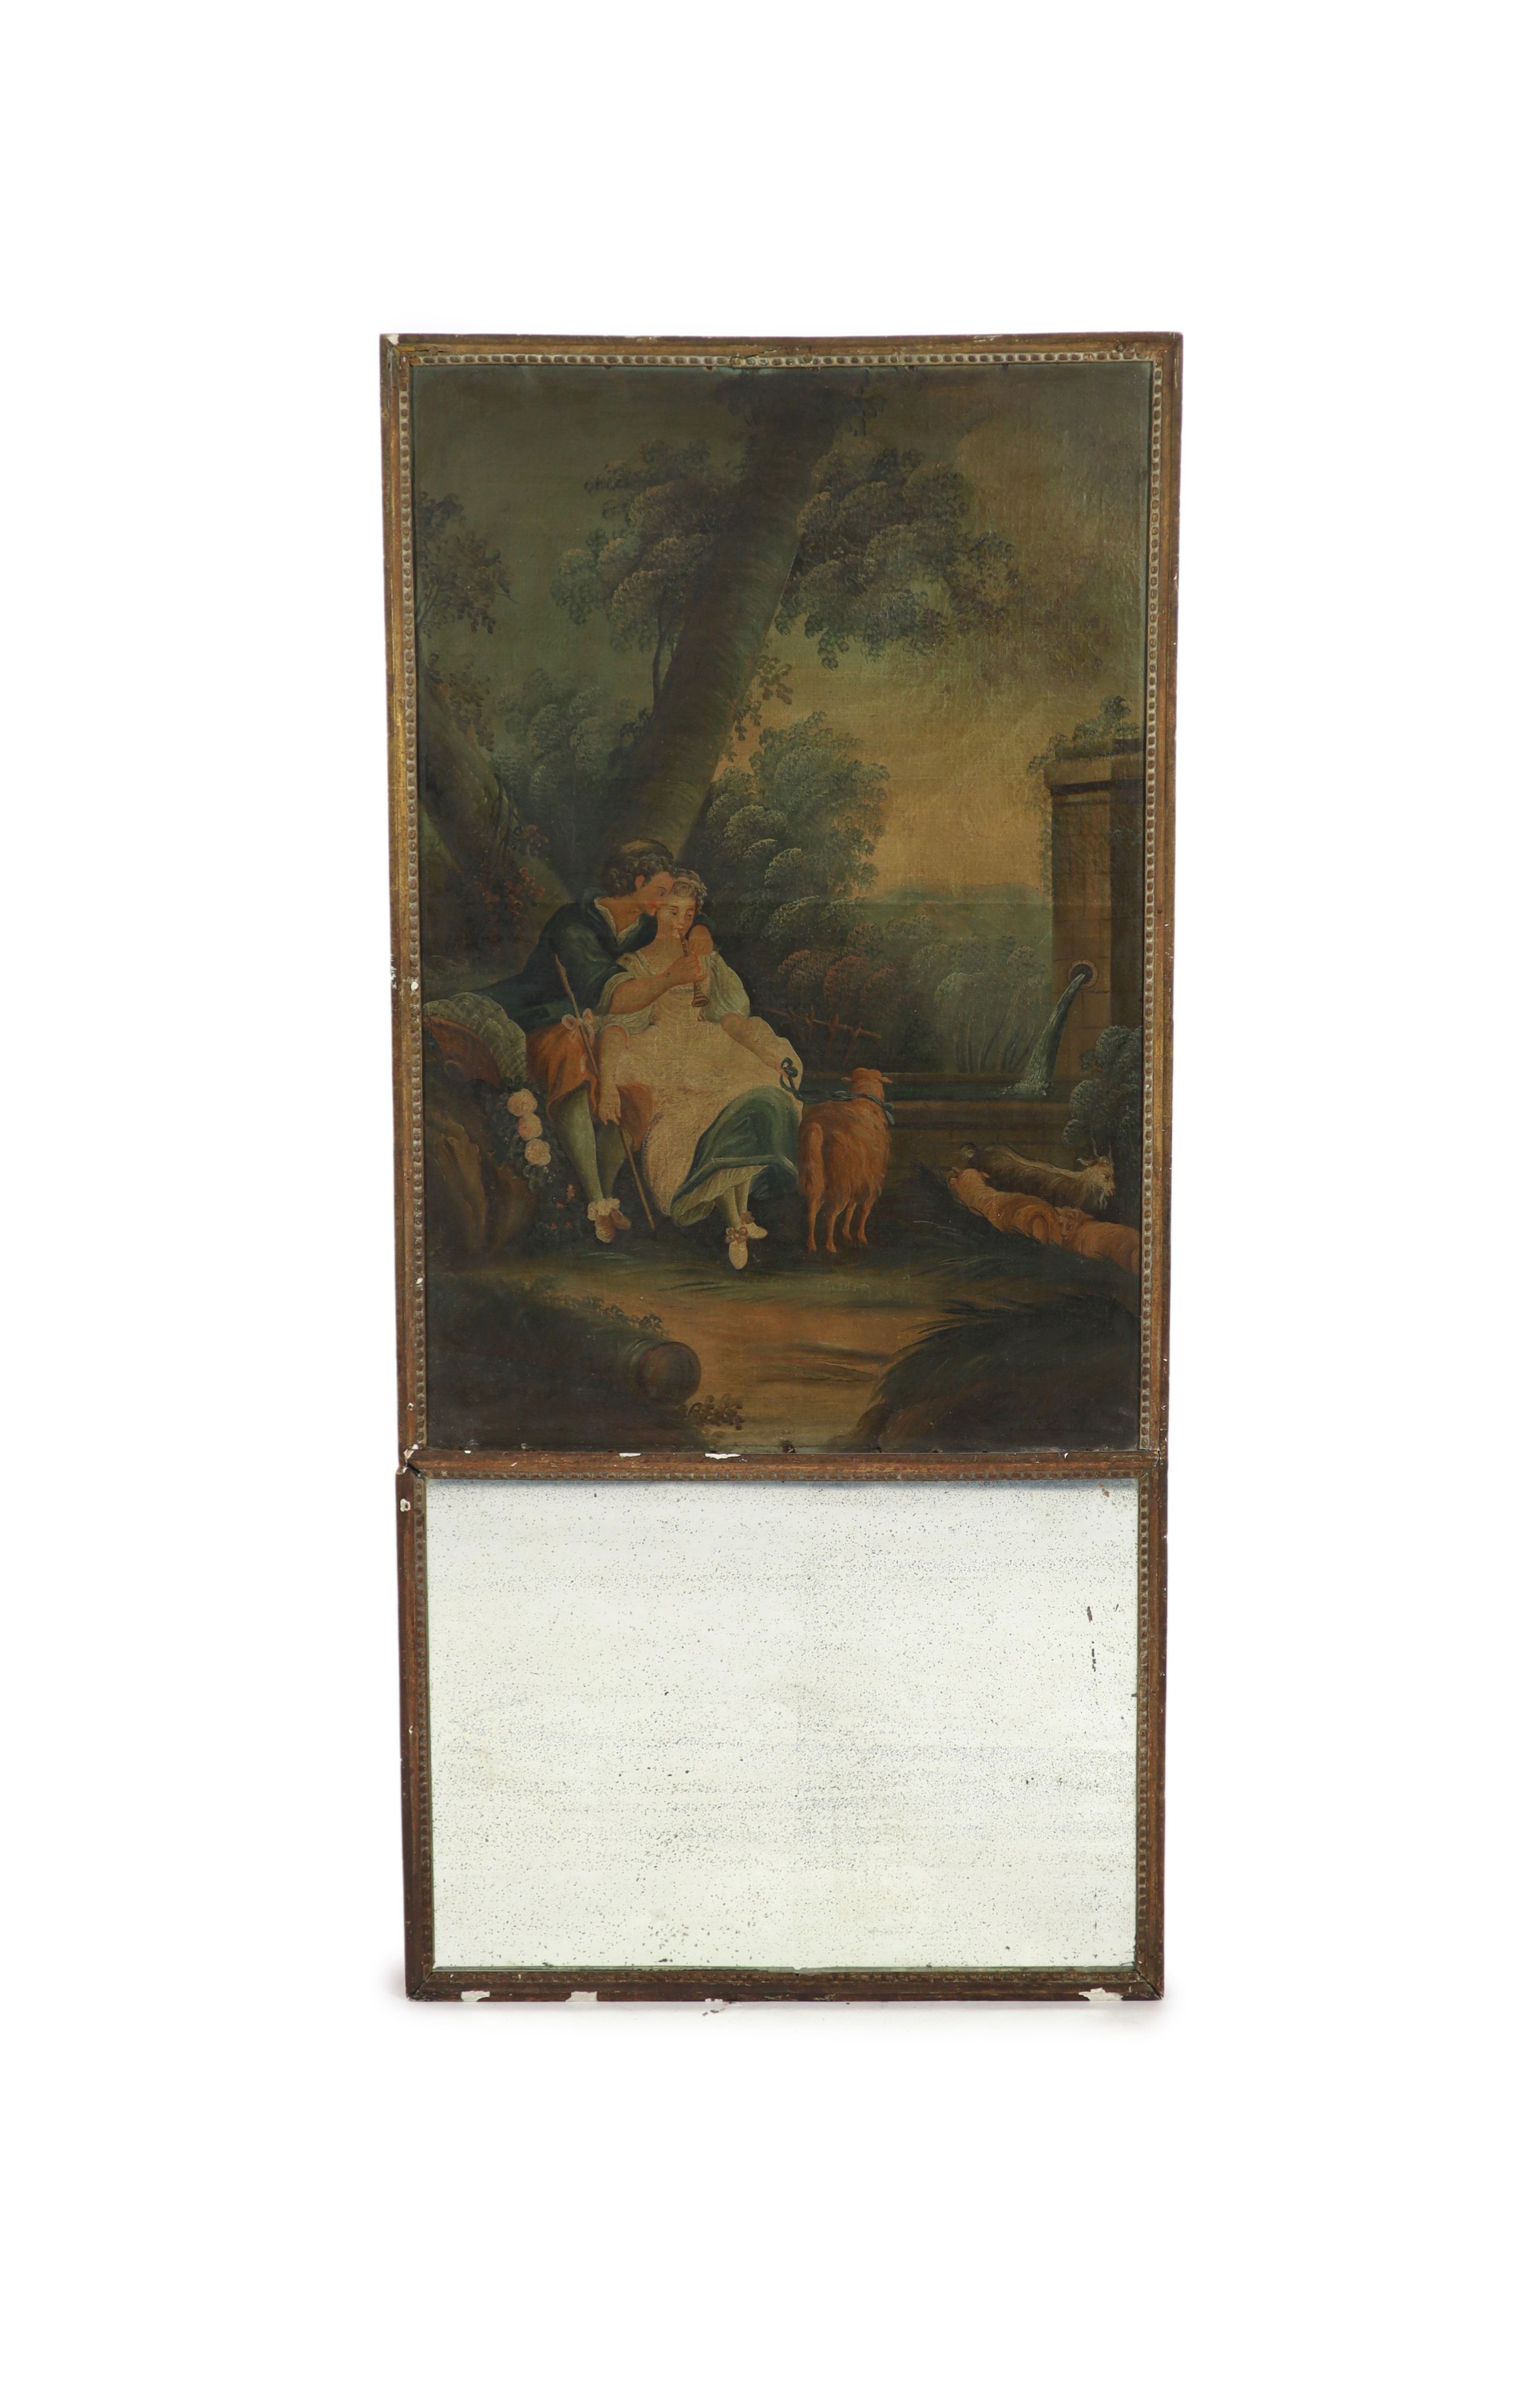 Late 19th century French School, Pastoral lovers, Oil on canvas, 100 x 67cm. Overall 156 x 72cm.